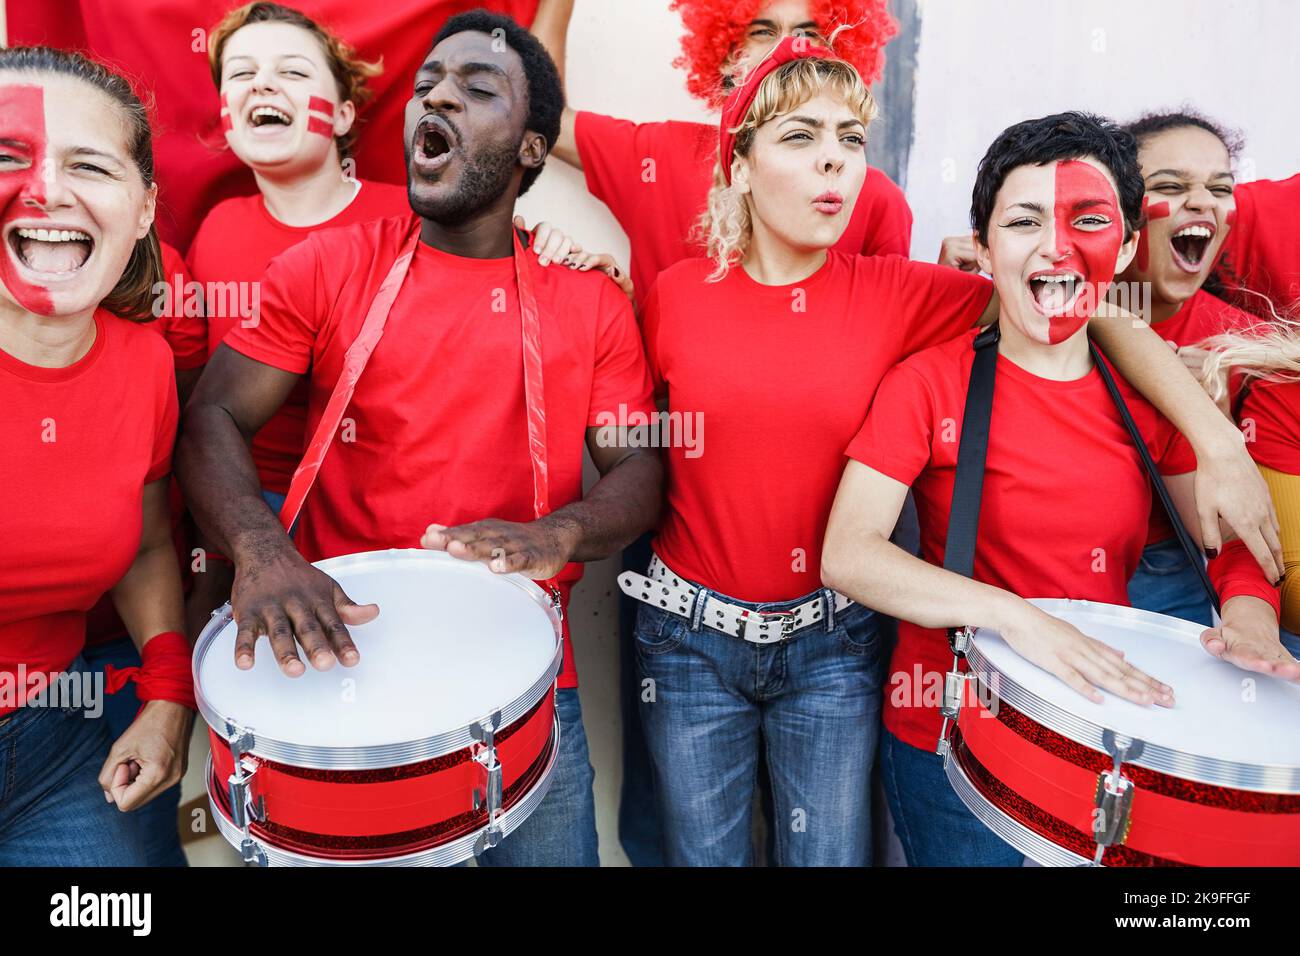 Multiracial red sport fans screaming while supporting their team - Football supporters having fun at competition event - Focus on right girl face Stock Photo